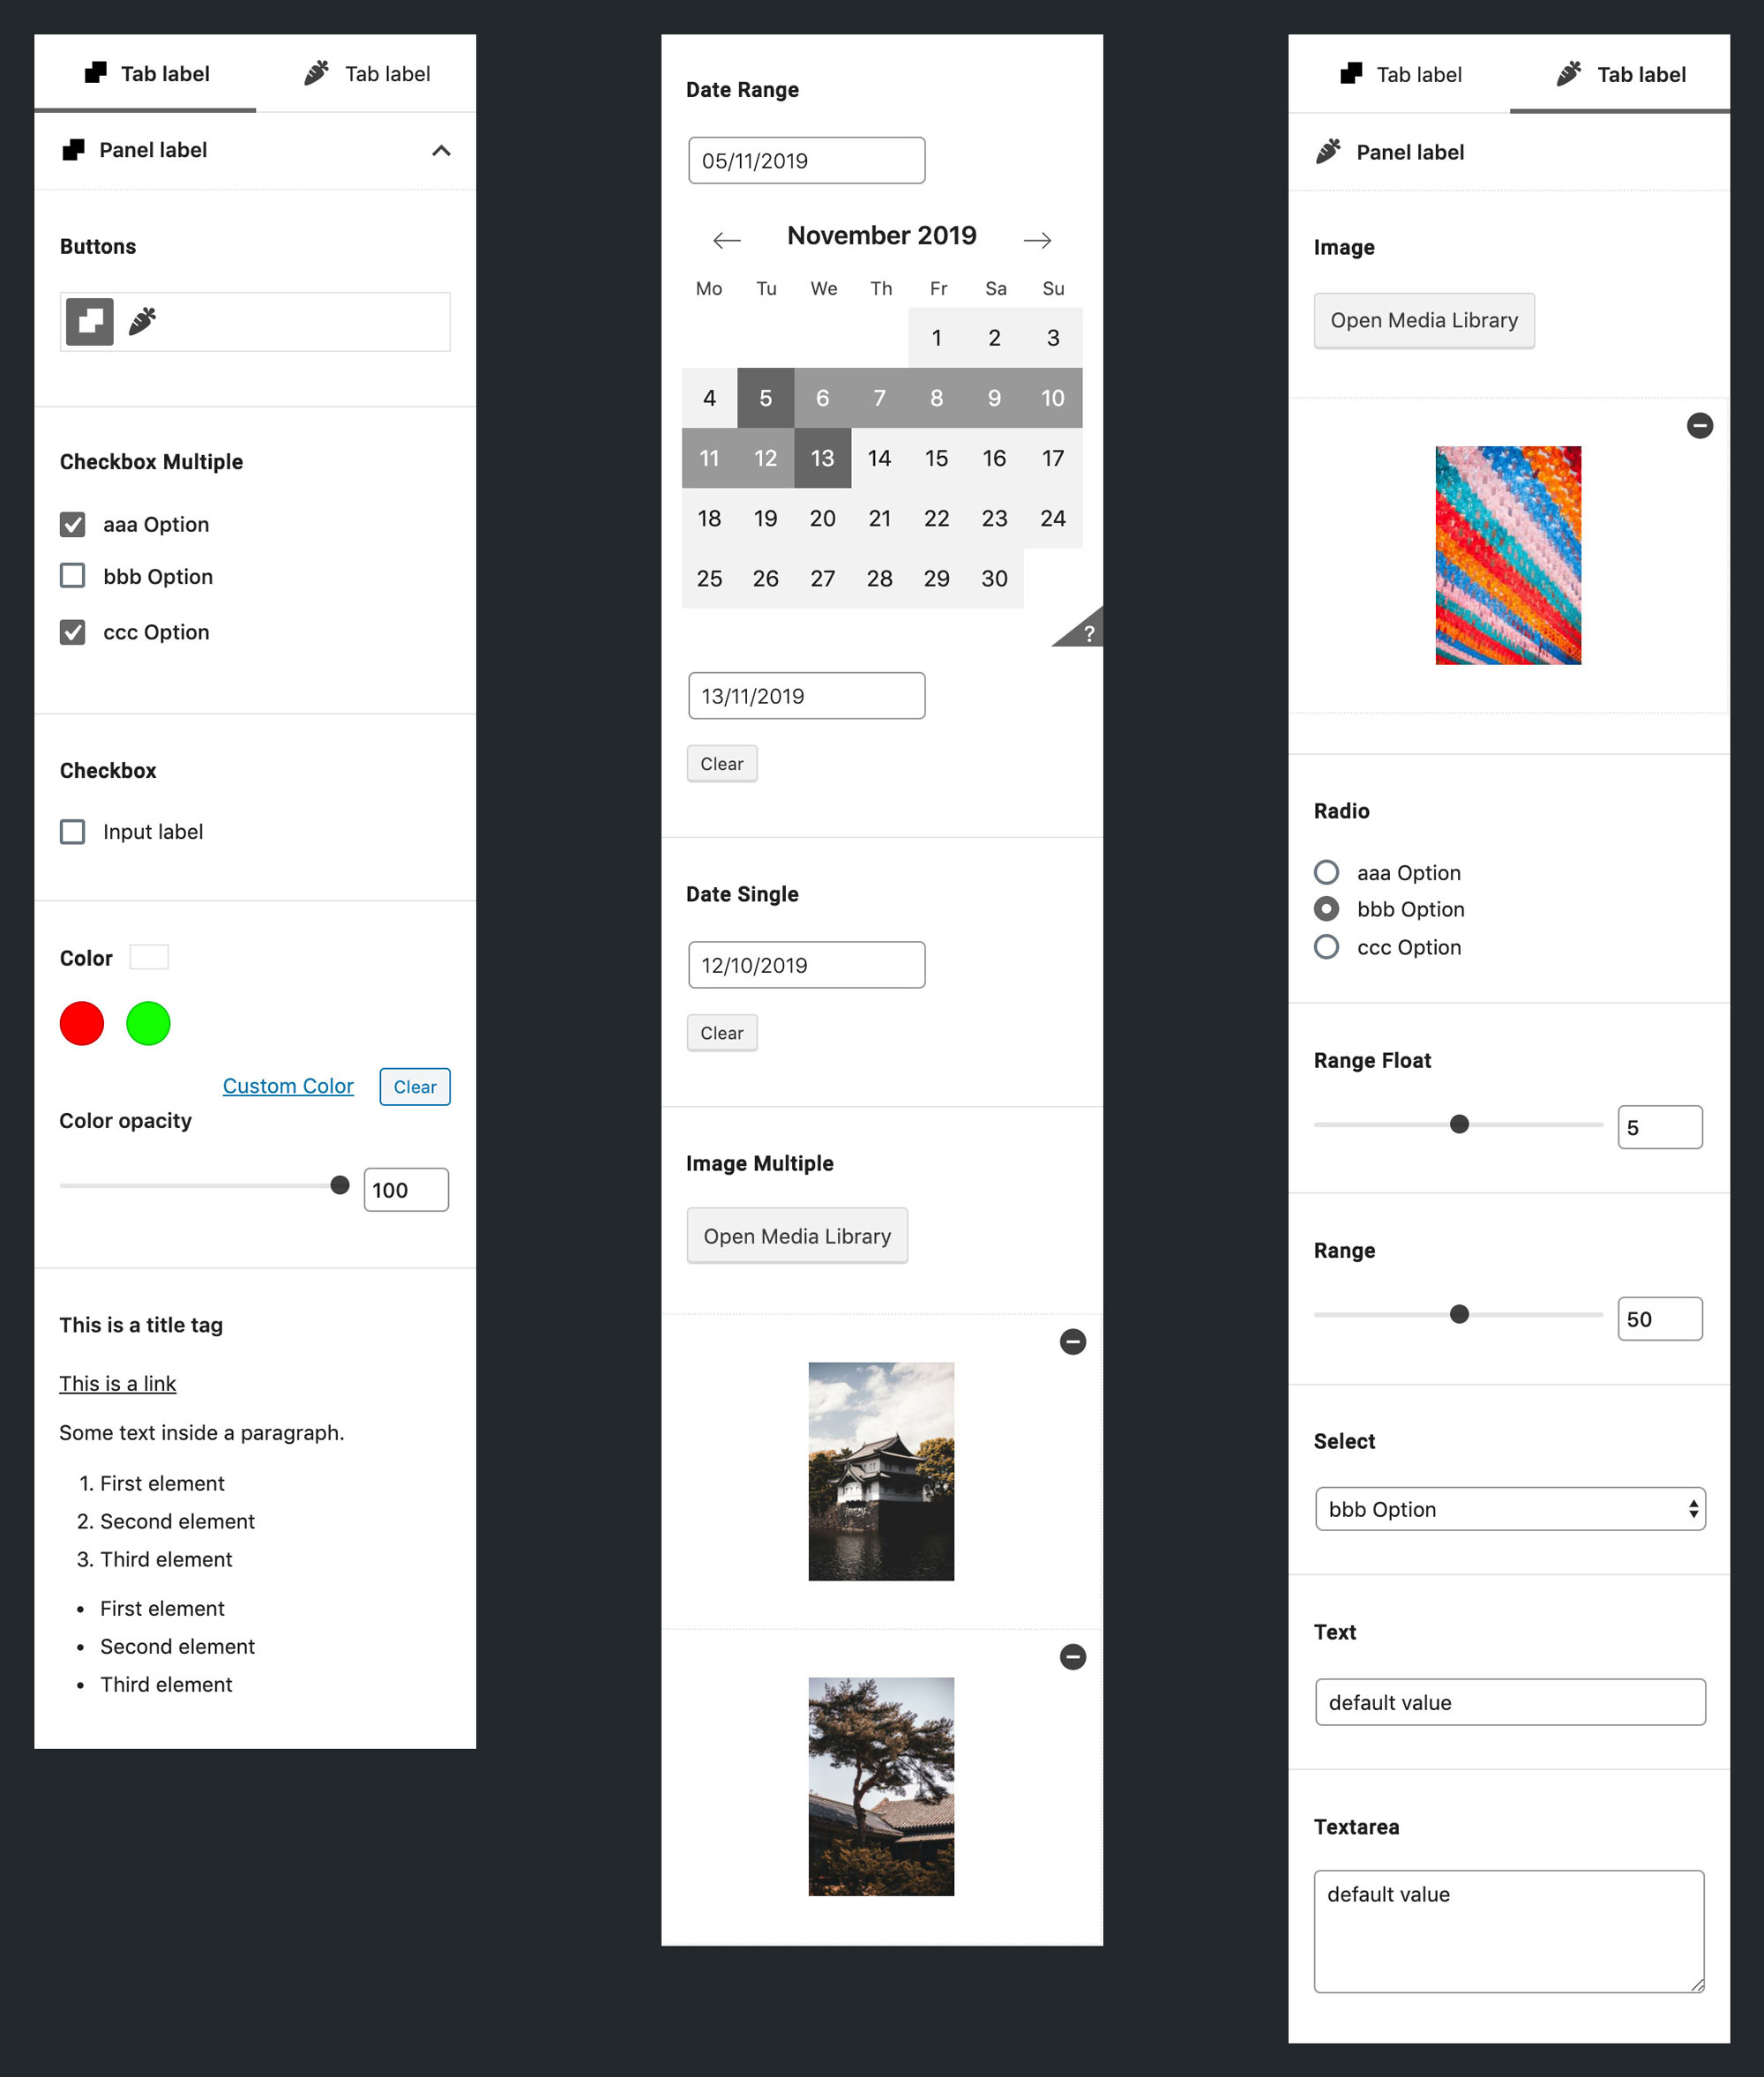 Sidebar with different tabs, panels and controls